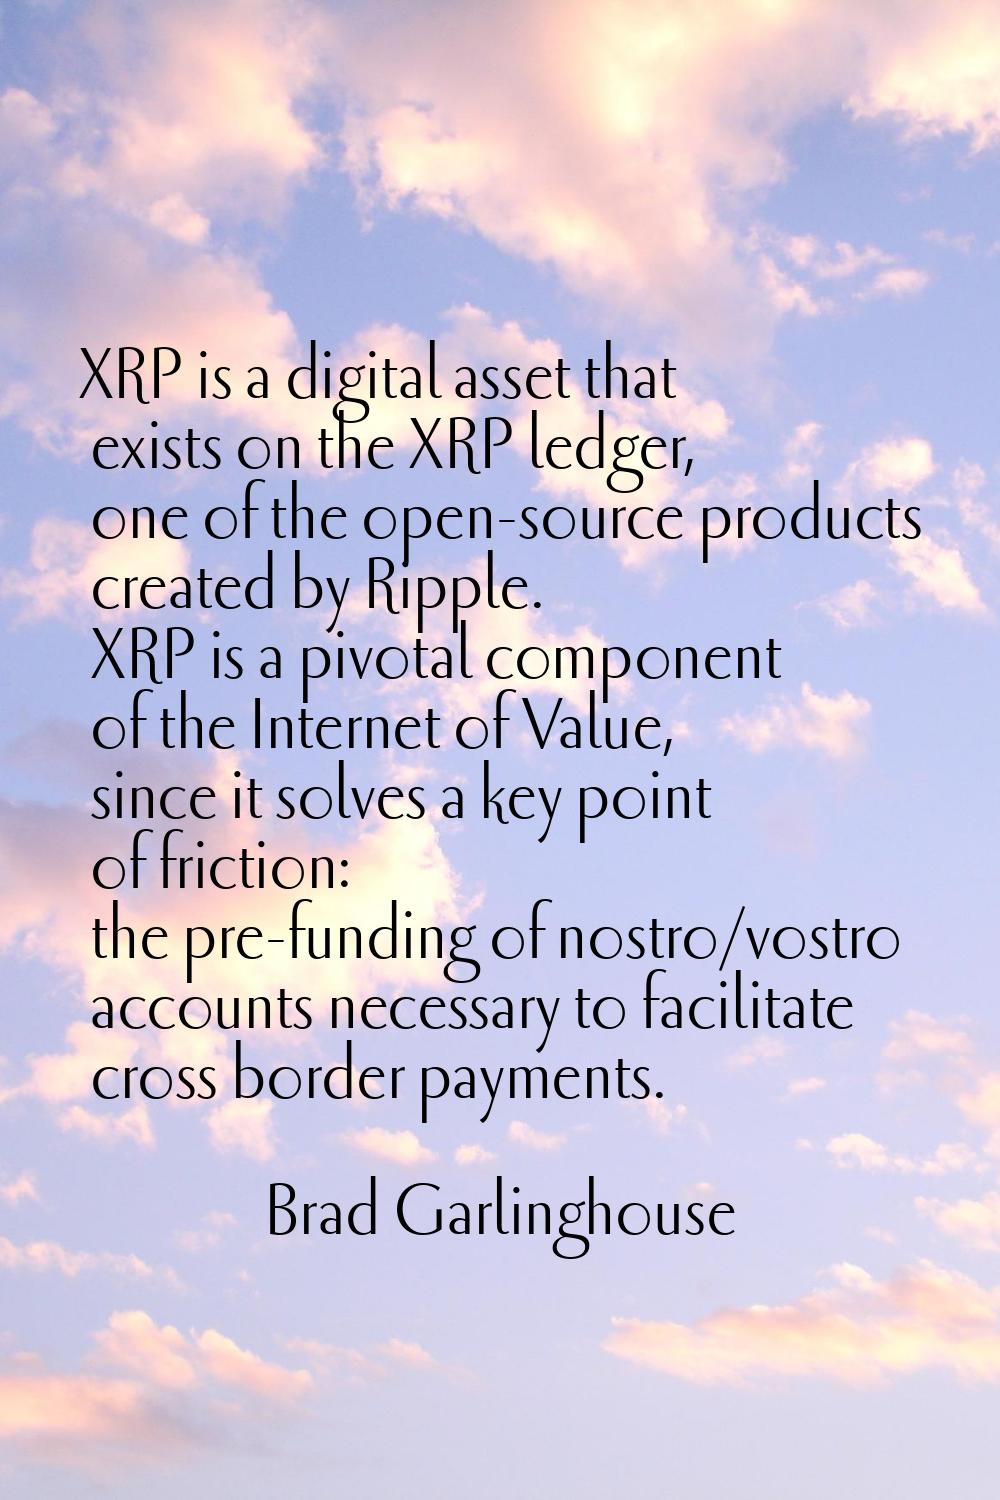 XRP is a digital asset that exists on the XRP ledger, one of the open-source products created by Ri